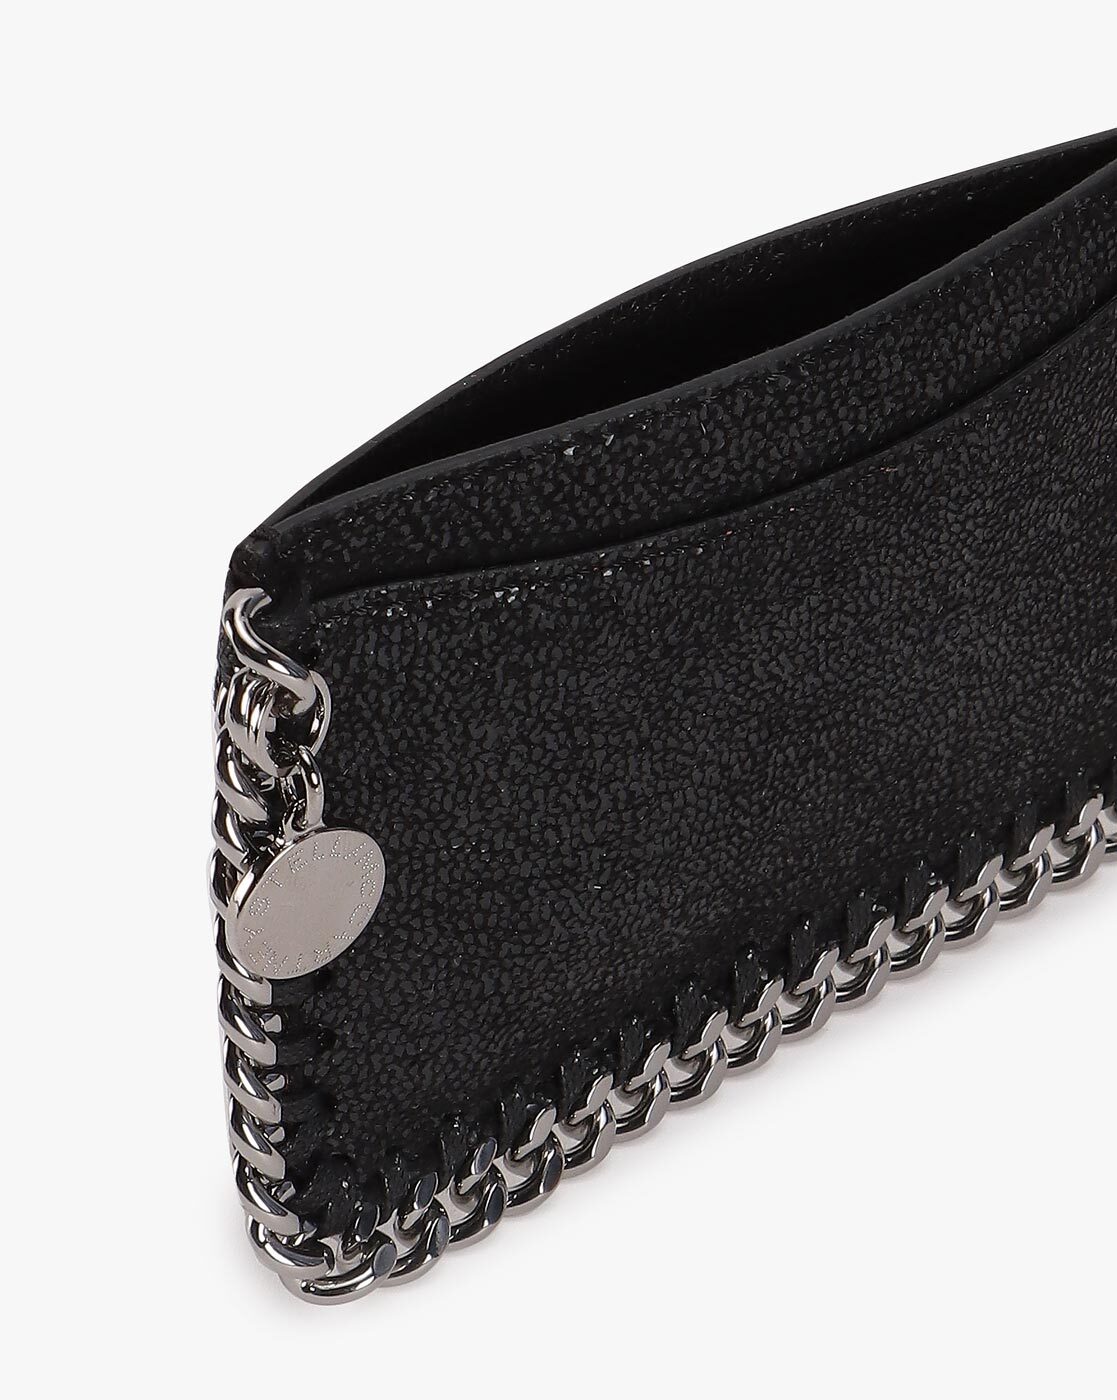 Save 56% Stella McCartney Leather Falabella Cardholder in Black Womens Accessories Wallets and cardholders 